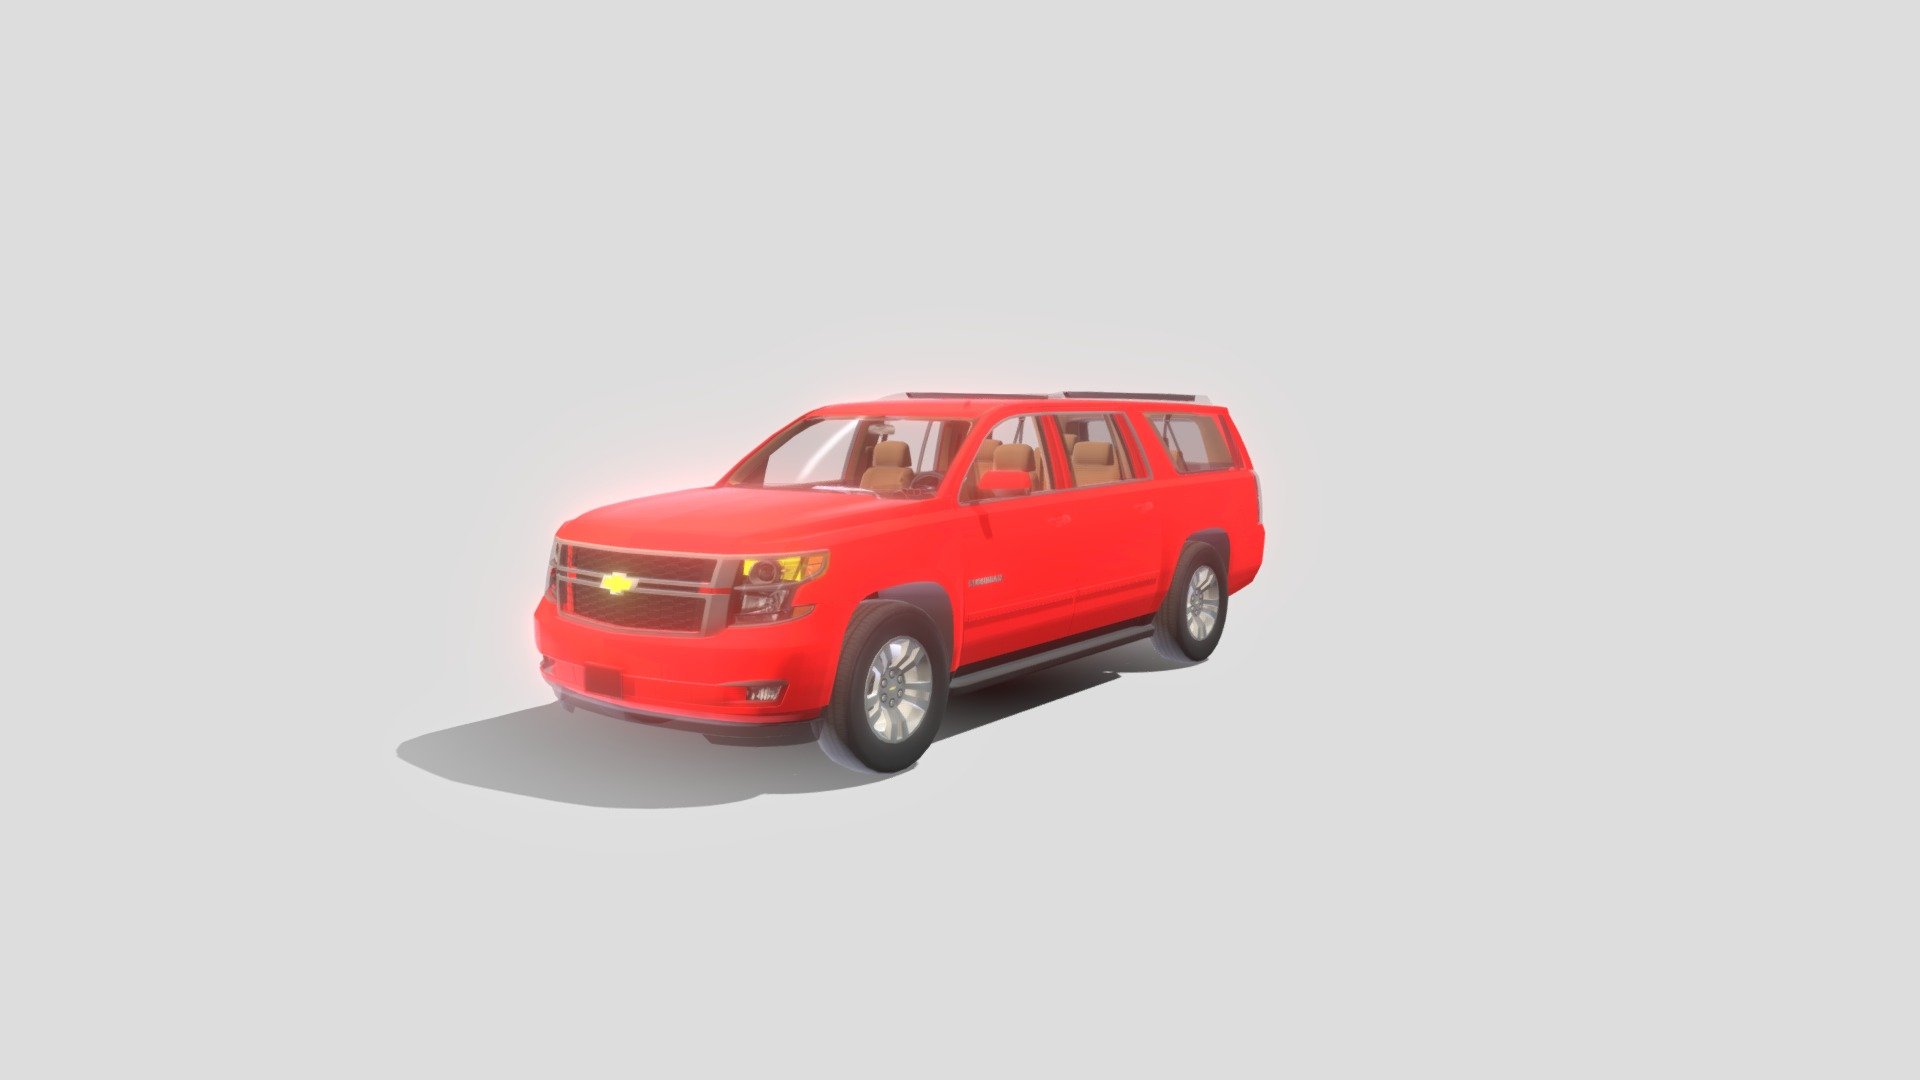 Chevrolet Suburban 2015-Unmarked
Unit 35 - Chevrolet Suburban 2015-Unmarked - Download Free 3D model by David_Holiday 3d model